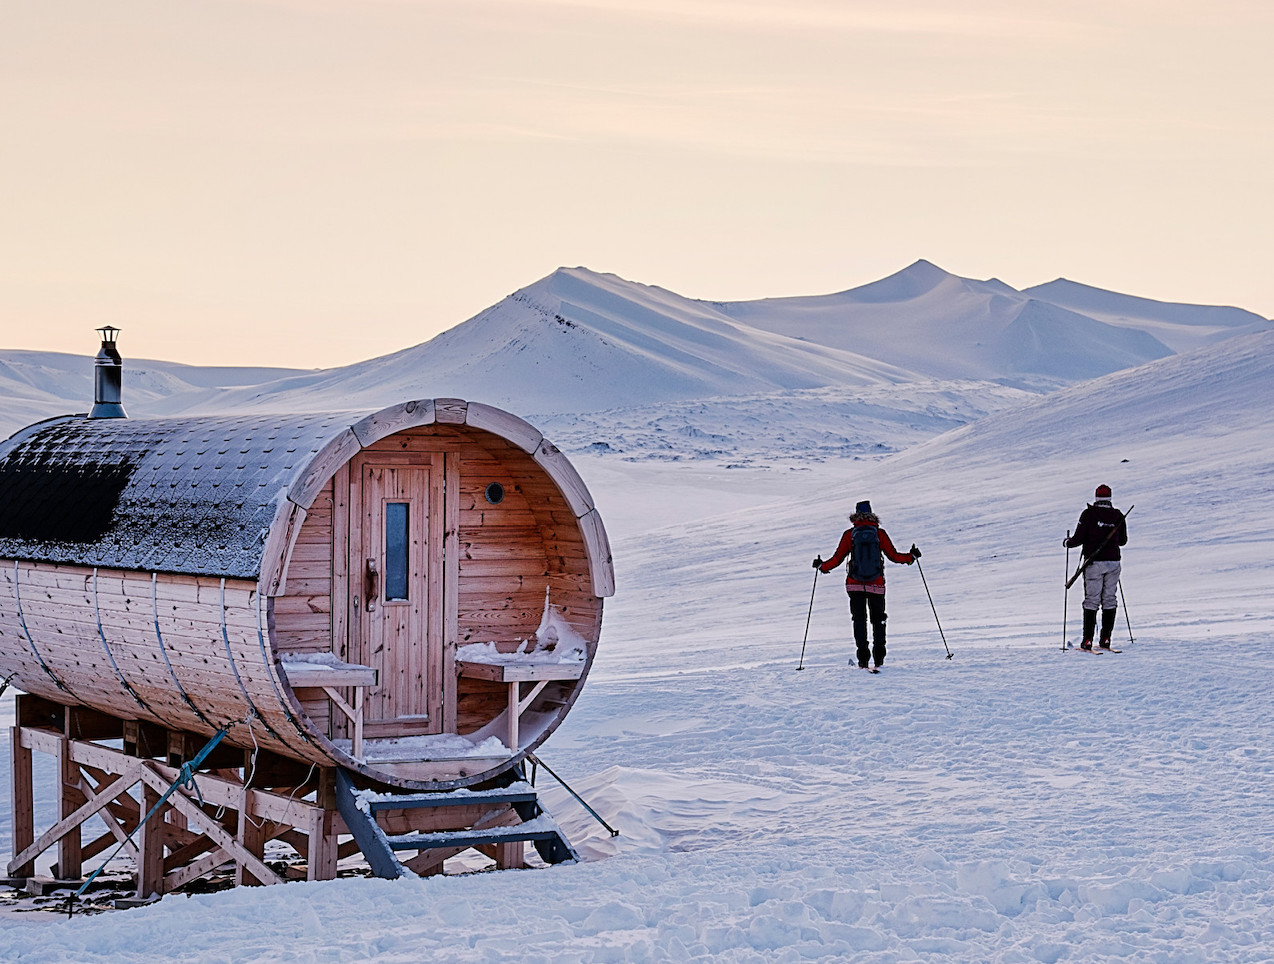 An epic new Svalbard expedition from Off the Map Travel takes travelers close to the North Pole and Northern Lights.